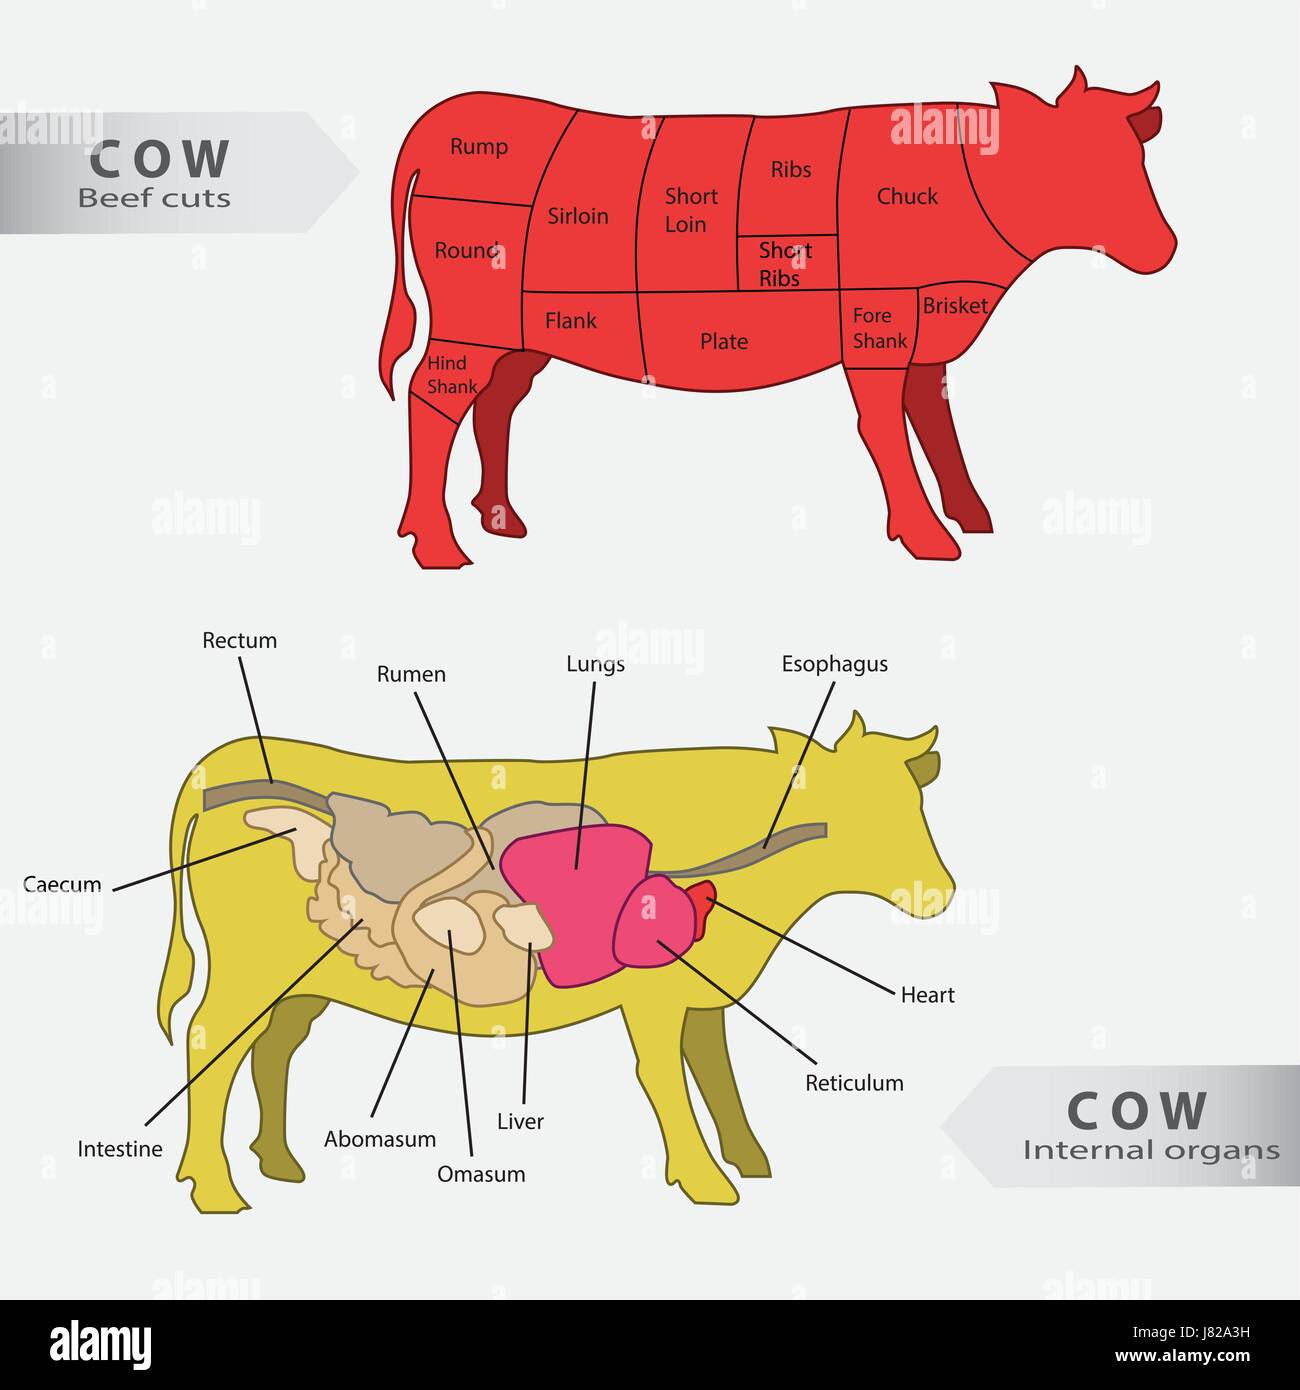 Basic cow internal organs and beef cuts chart vector Stock Vector